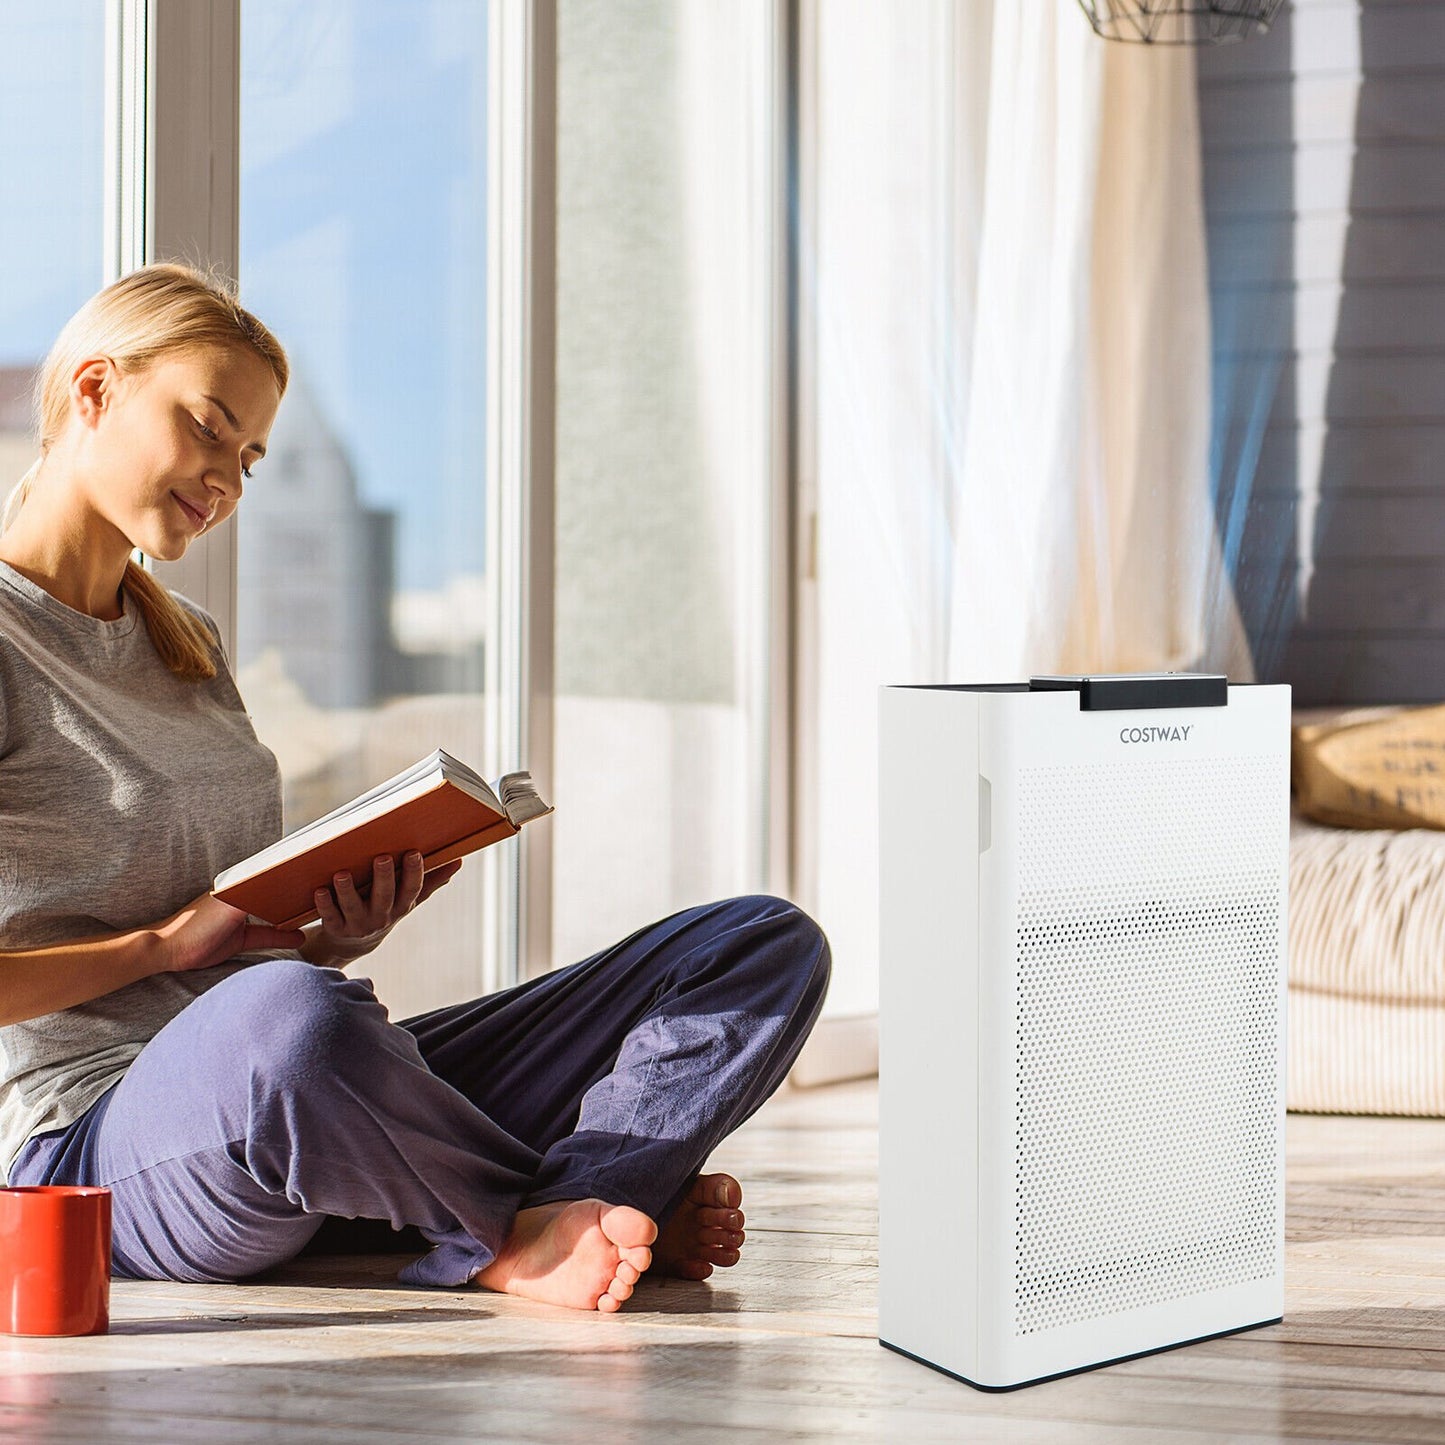 Ozone Free Air Purifier with H13 True HEPA Filter Air Cleaner up to 1200 Sq. Ft, White at Gallery Canada